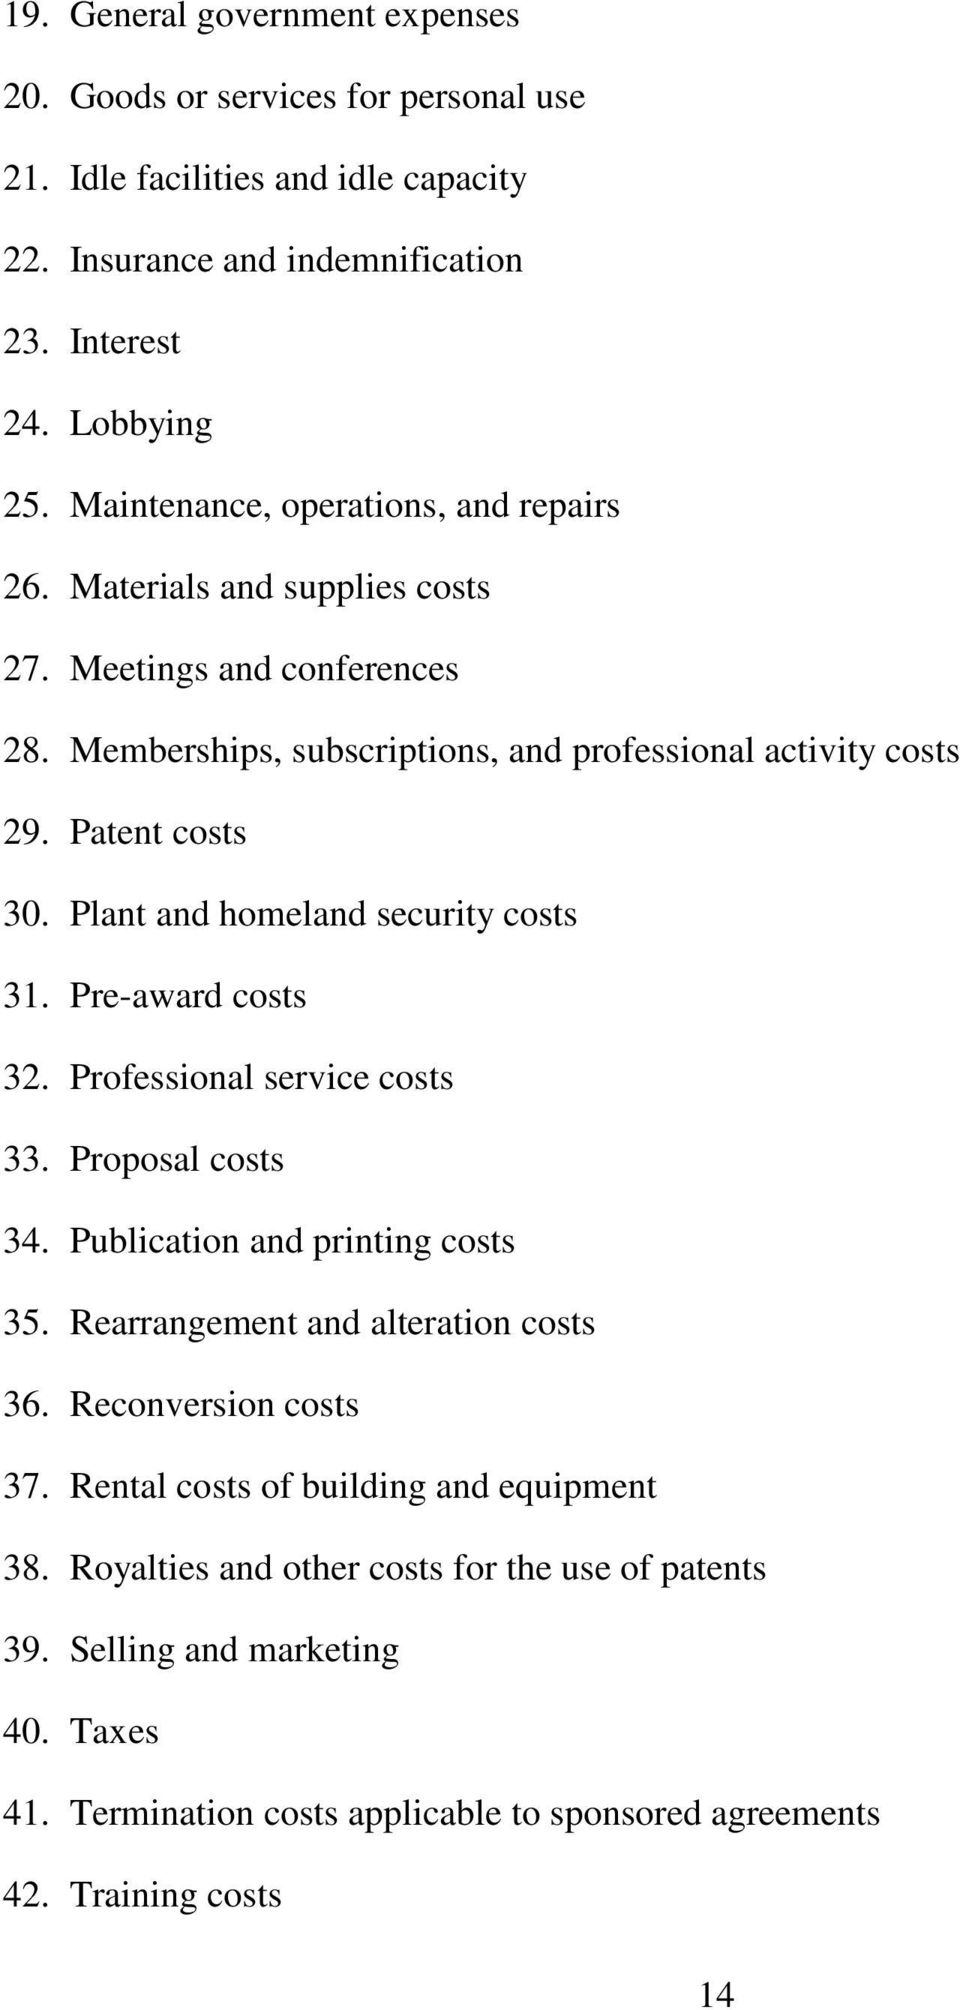 Plant and homeland security costs 31. Pre-award costs 32. Professional service costs 33. Proposal costs 34. Publication and printing costs 35. Rearrangement and alteration costs 36.